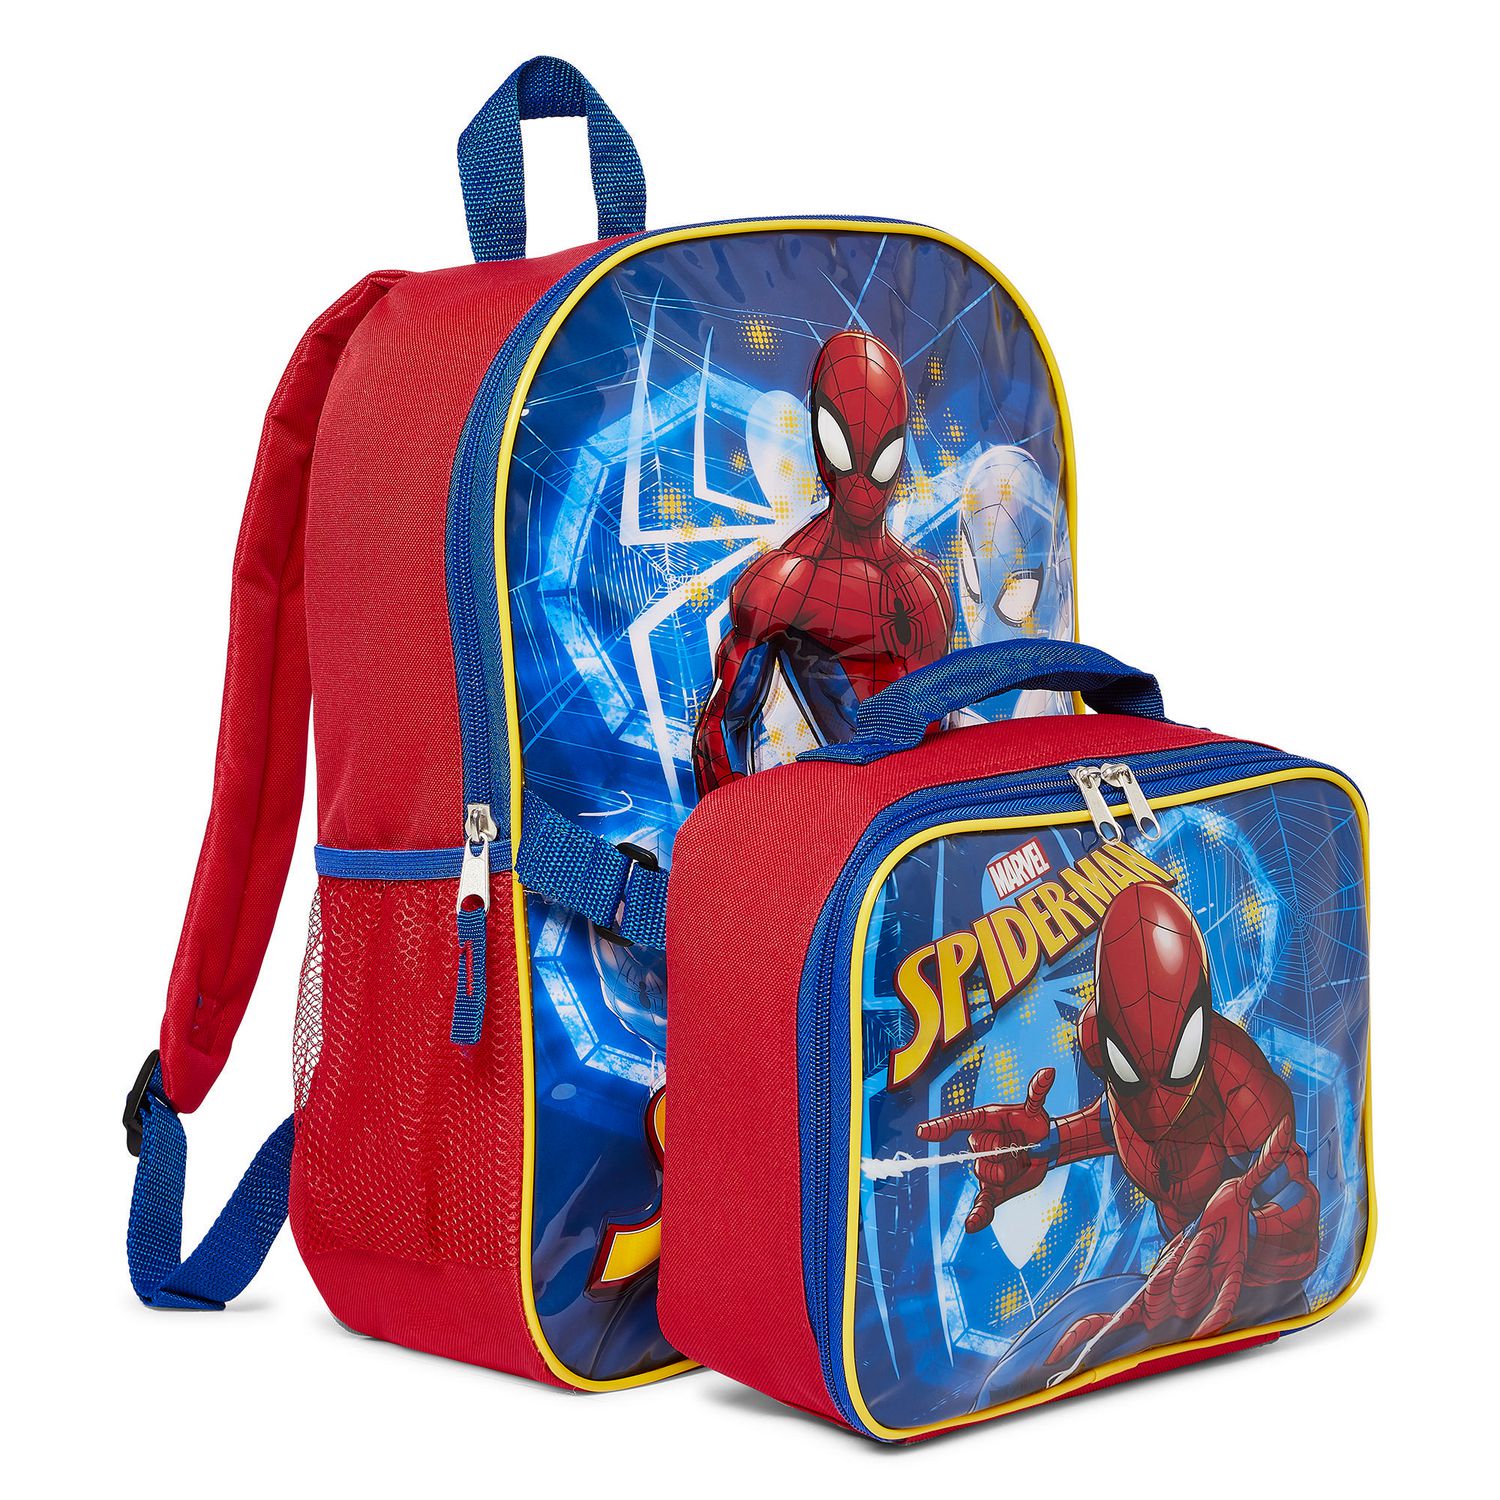 Spider Man Backpack with Lunch Bag | Walmart Canada